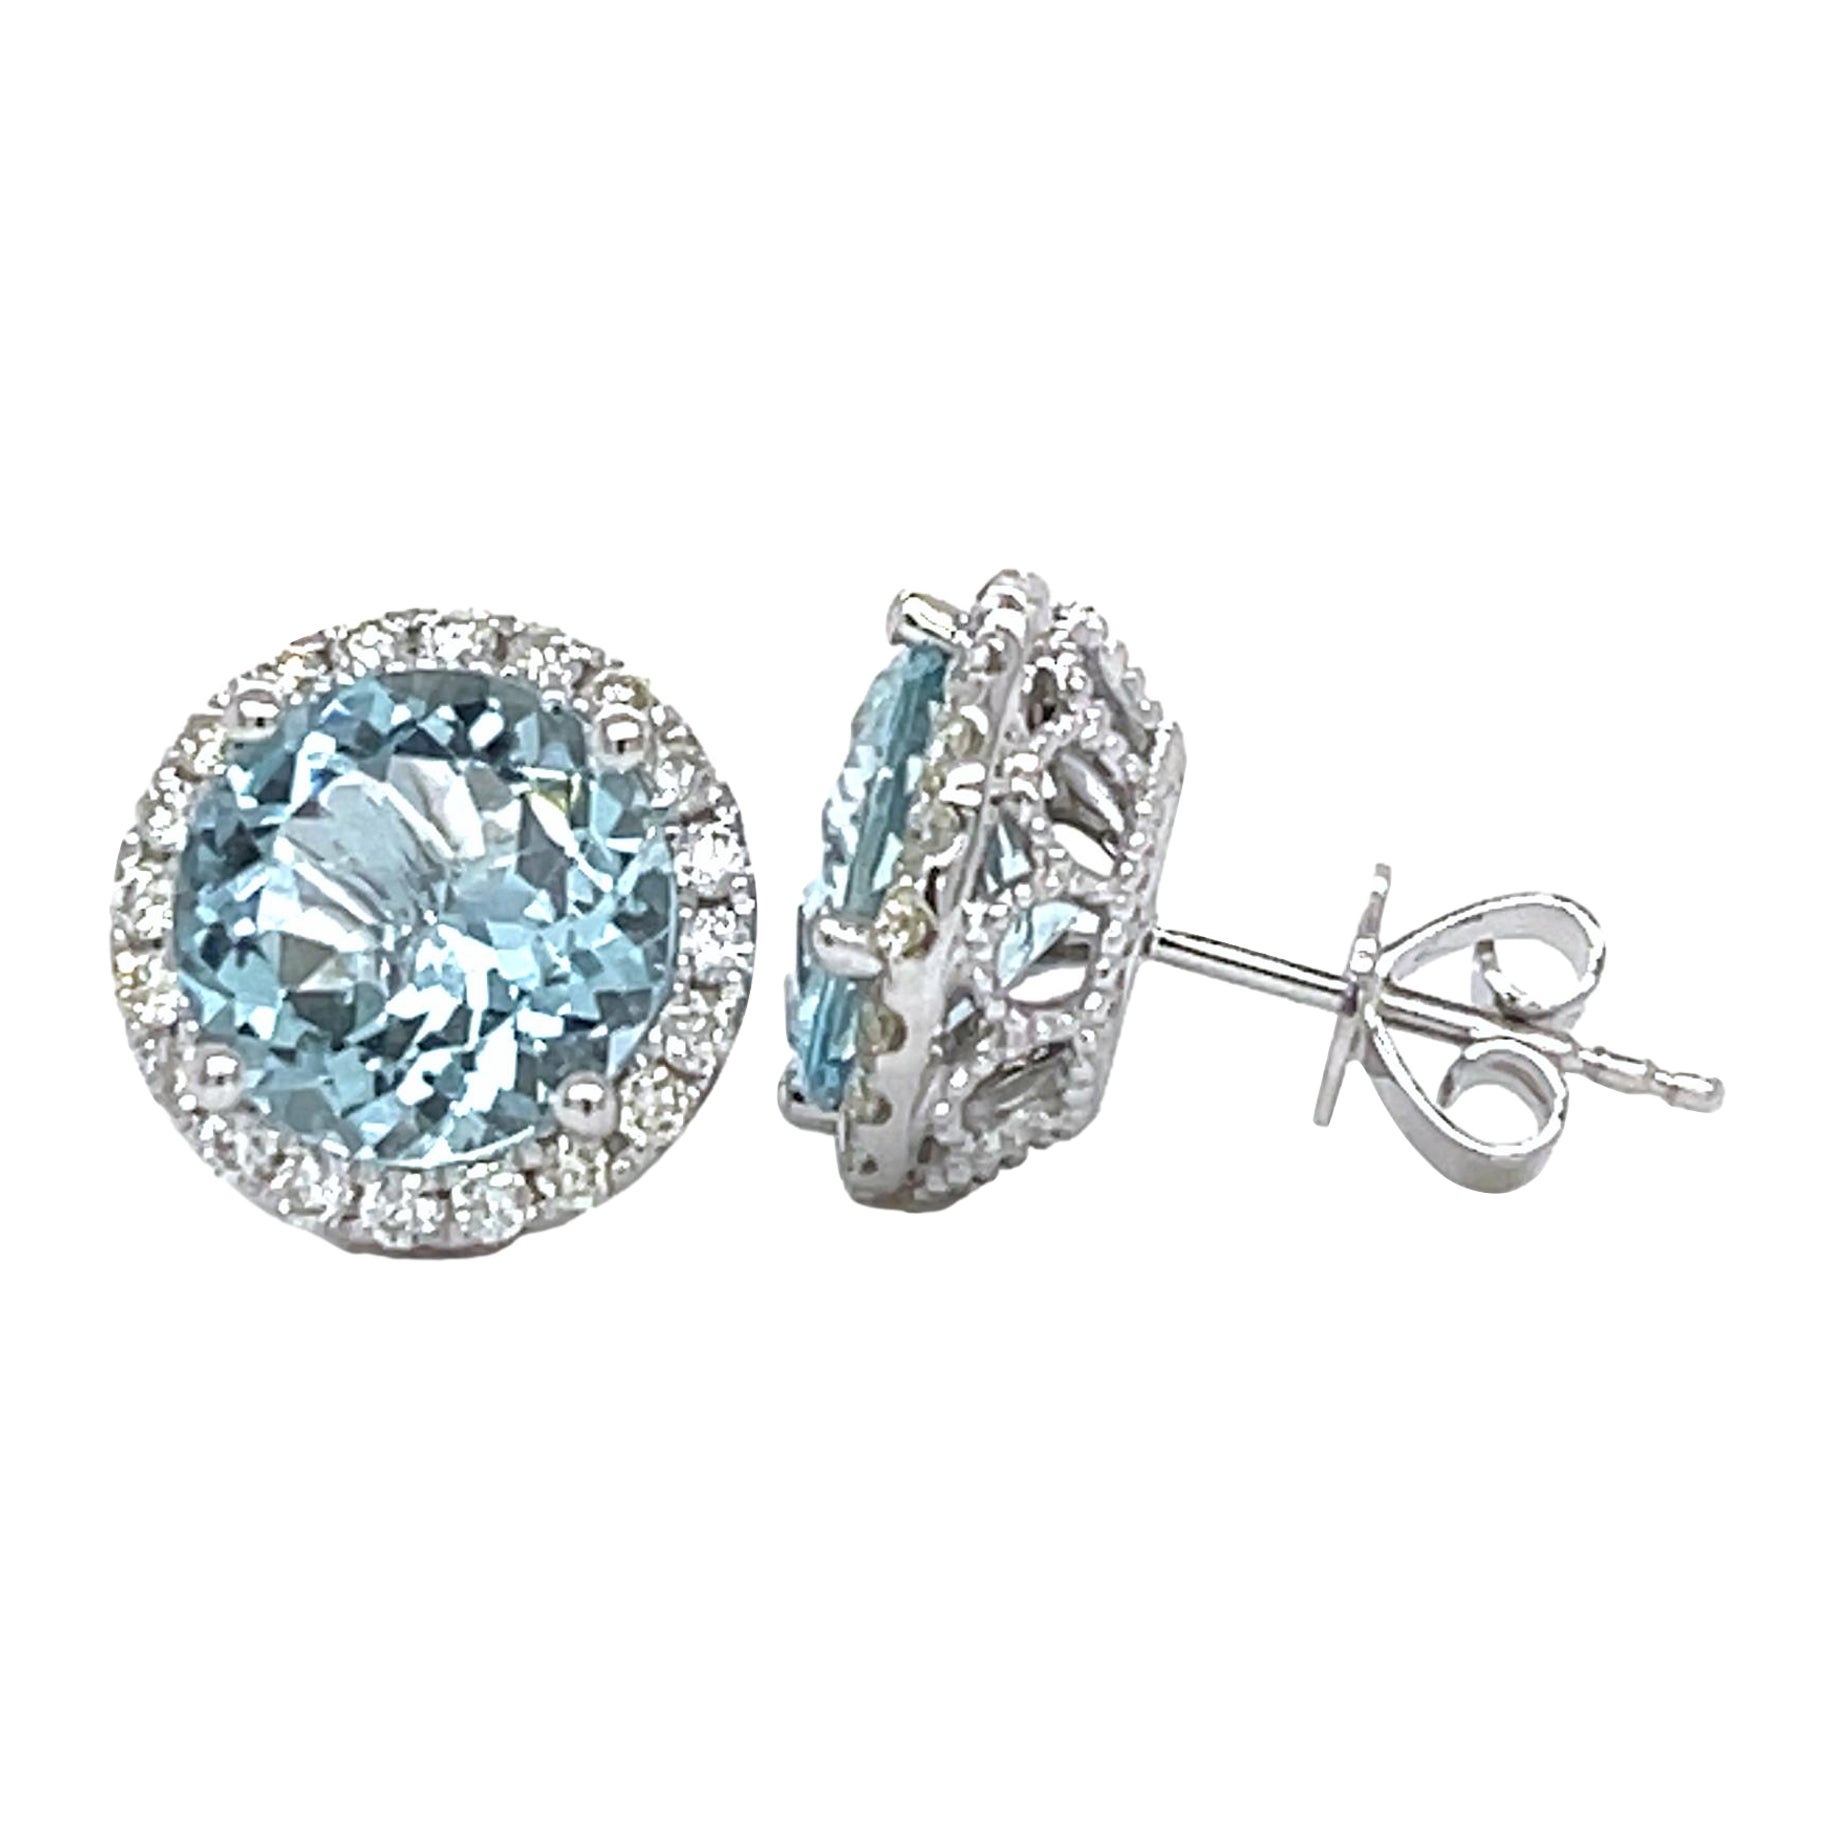 Top Quality Aquamarine Halo Earrings in 14KW Gold